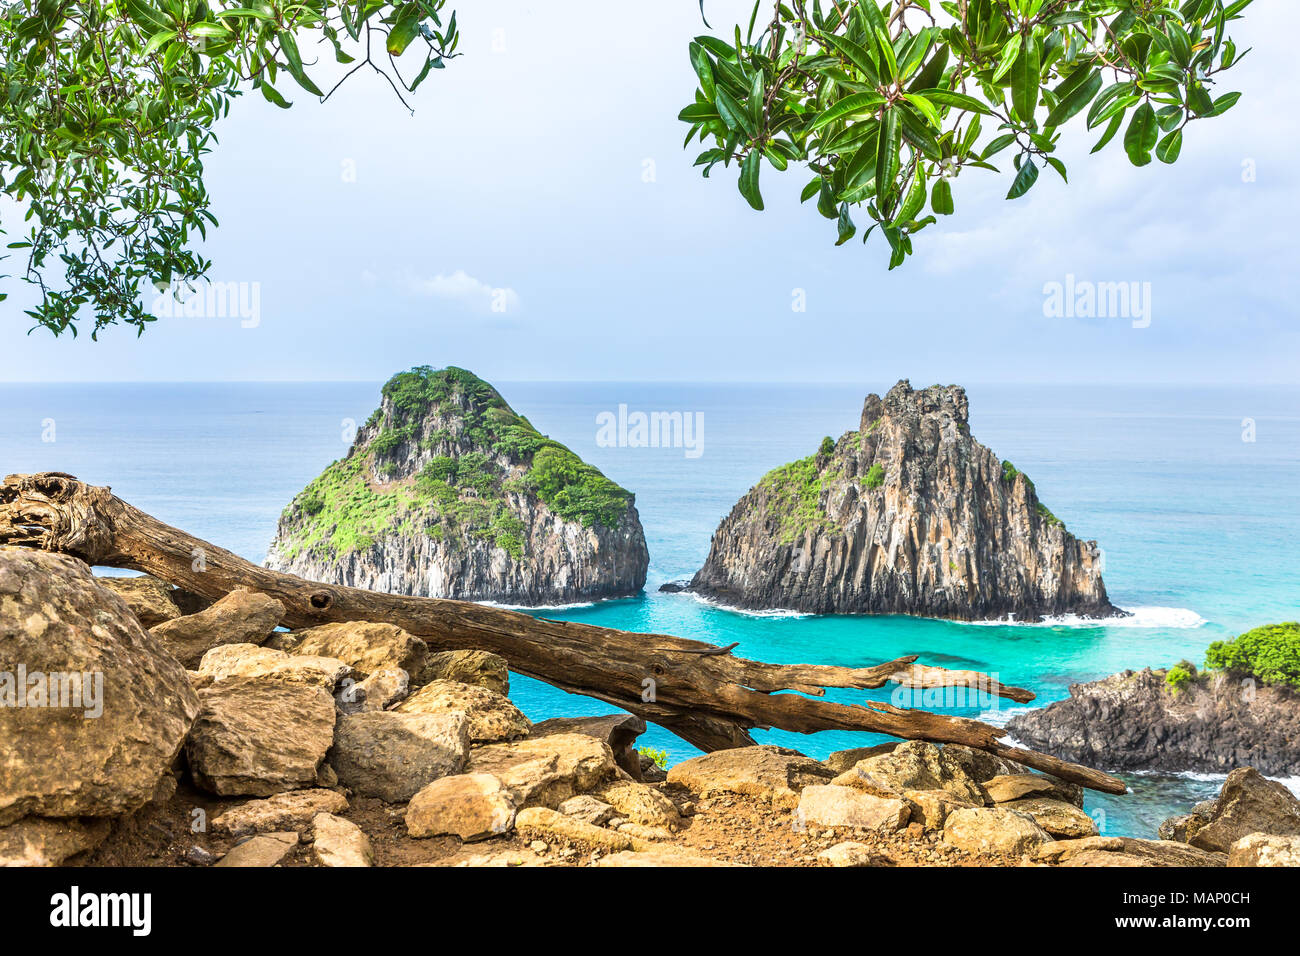 Fernando de Noronha, Brazil. View of Morro dos Dois Irmaos with gains and plants in the foreground. Stock Photo